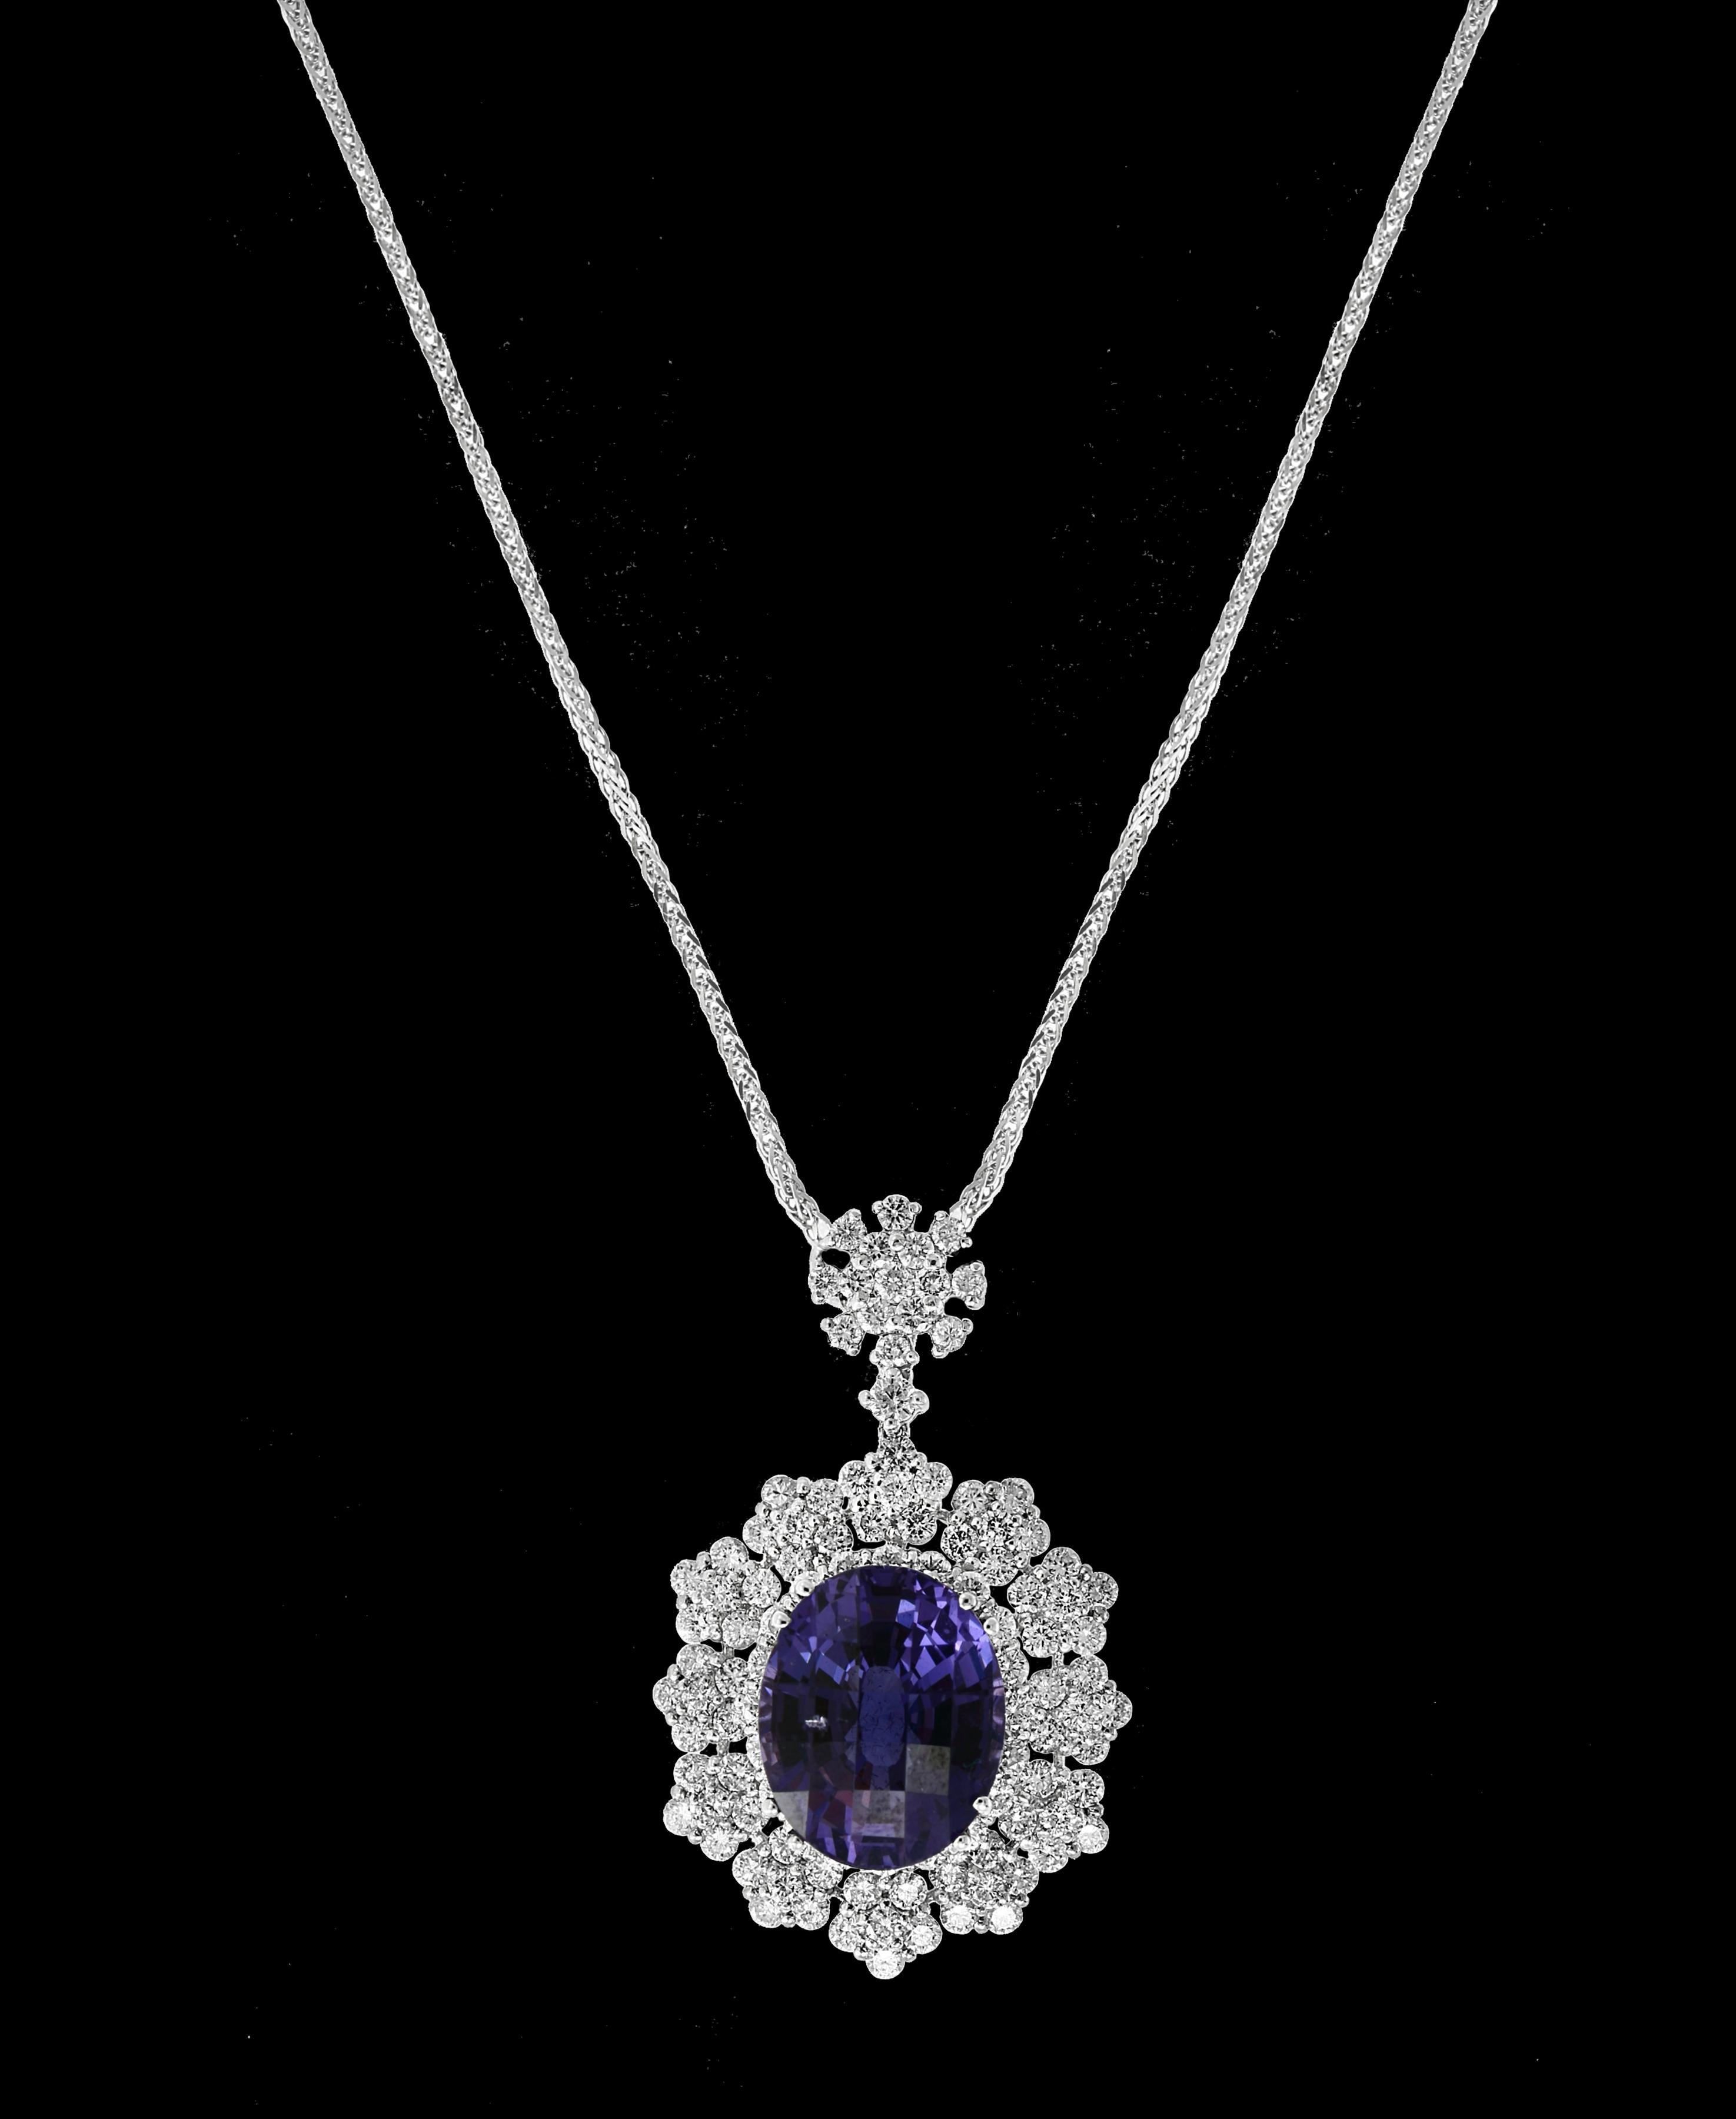   11 Carat  Round  Shape Spinel  & Diamond Pendant Necklace 18 K Gold
This spectacular Pendant Necklace  consisting of a single Round Shape Spinel approximately  11 Carat.  The  Spinel    is surrounded by approximately  4.2 Carats of  brilliant cut